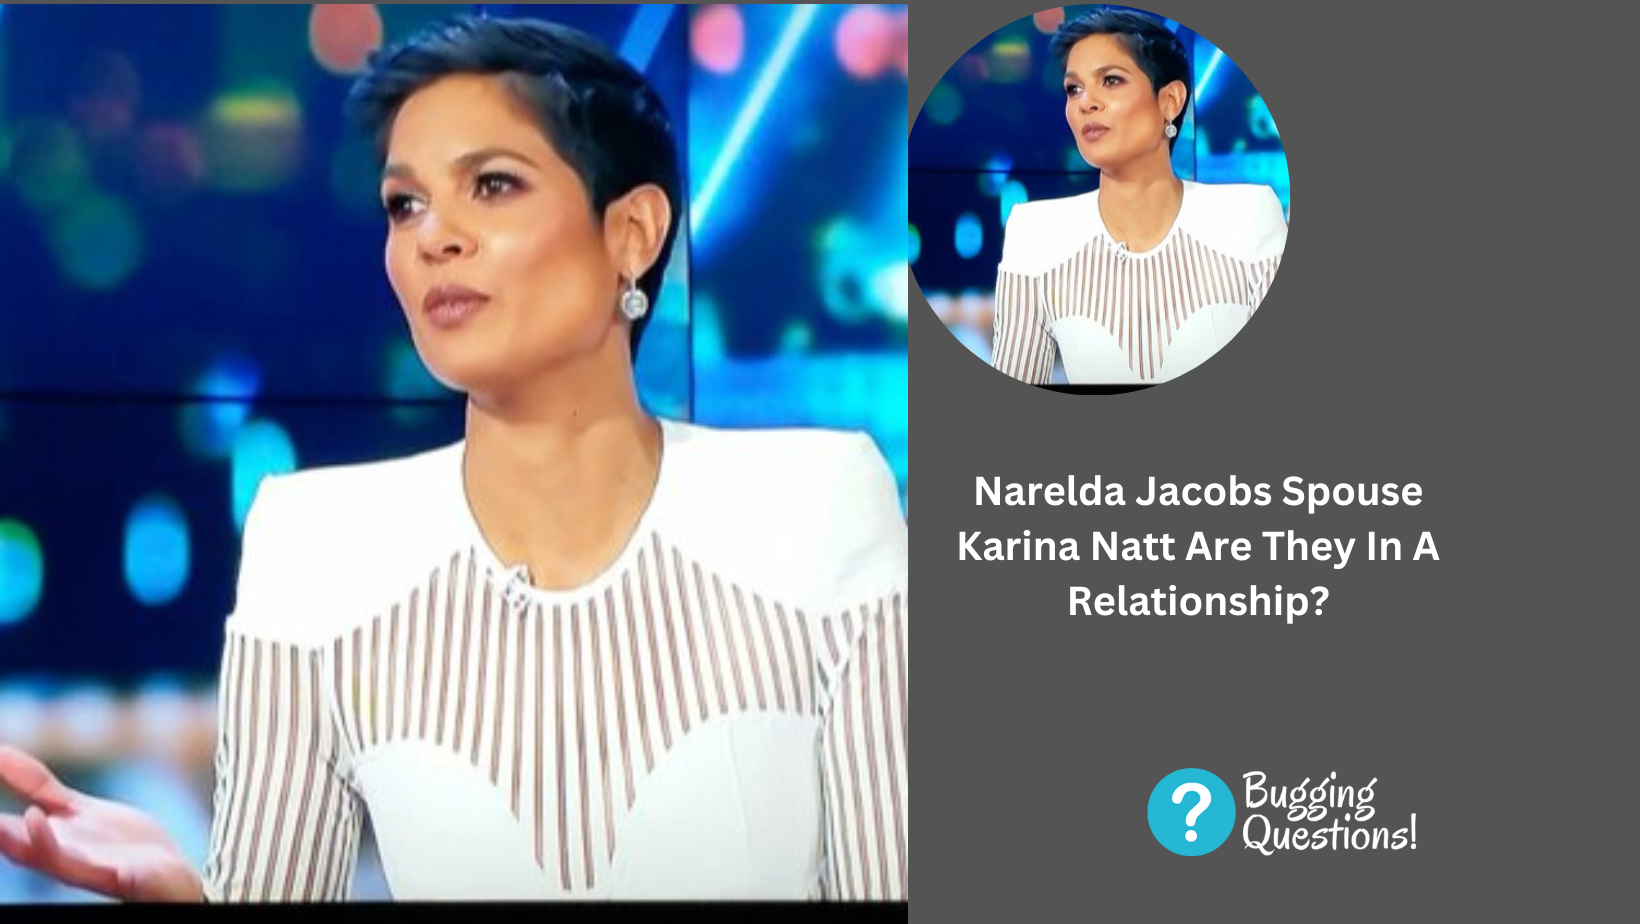 Narelda Jacobs Spouse Karina Natt Are They In A Relationship?